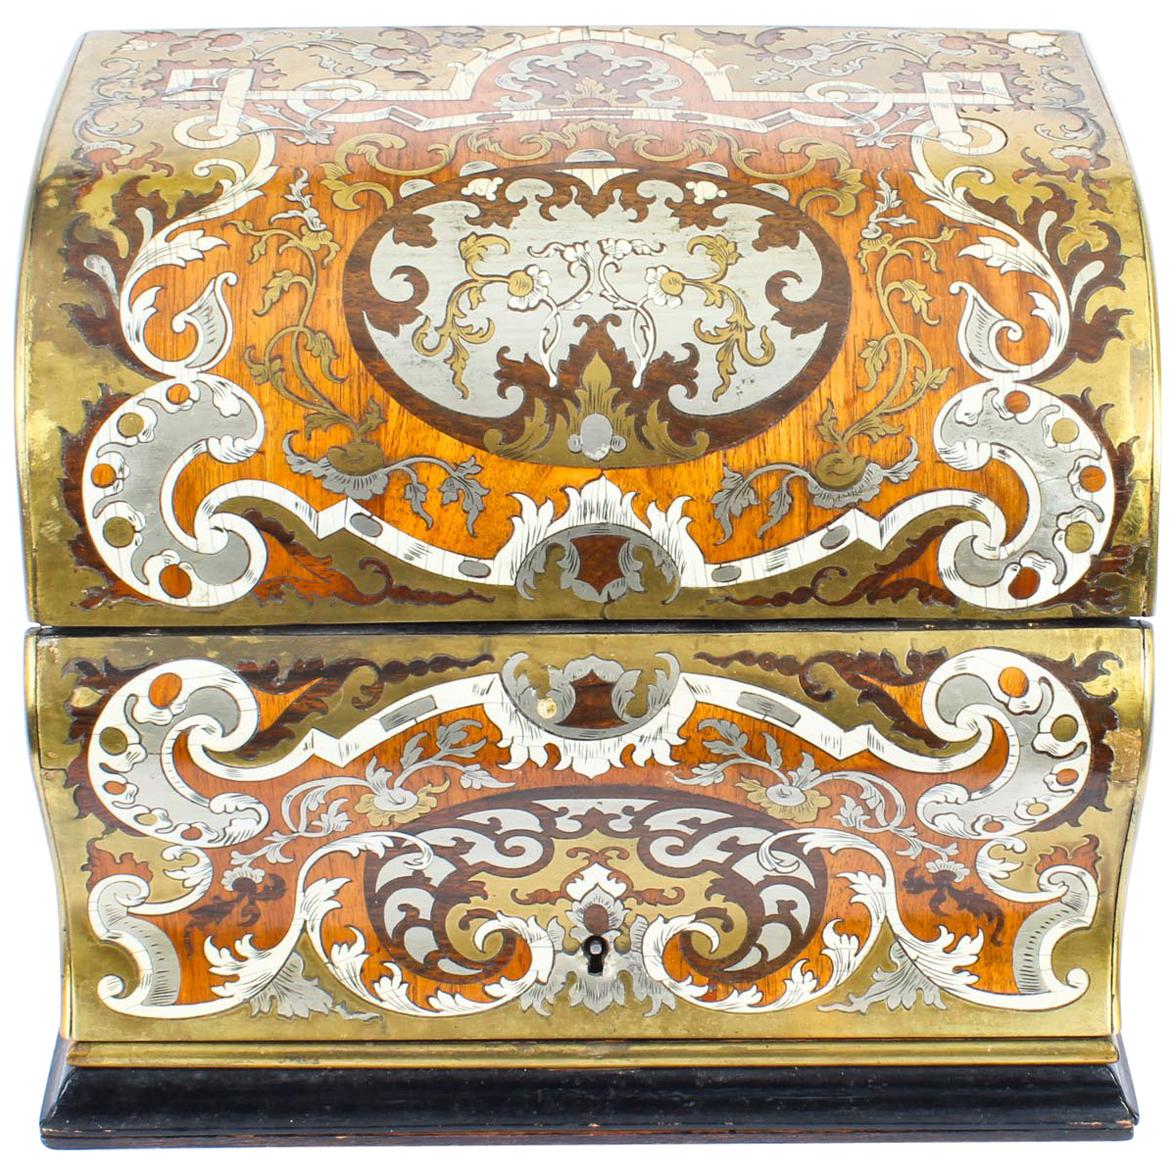 19th Century Gilt Brass Inlaid Fall Front Stationery Casket